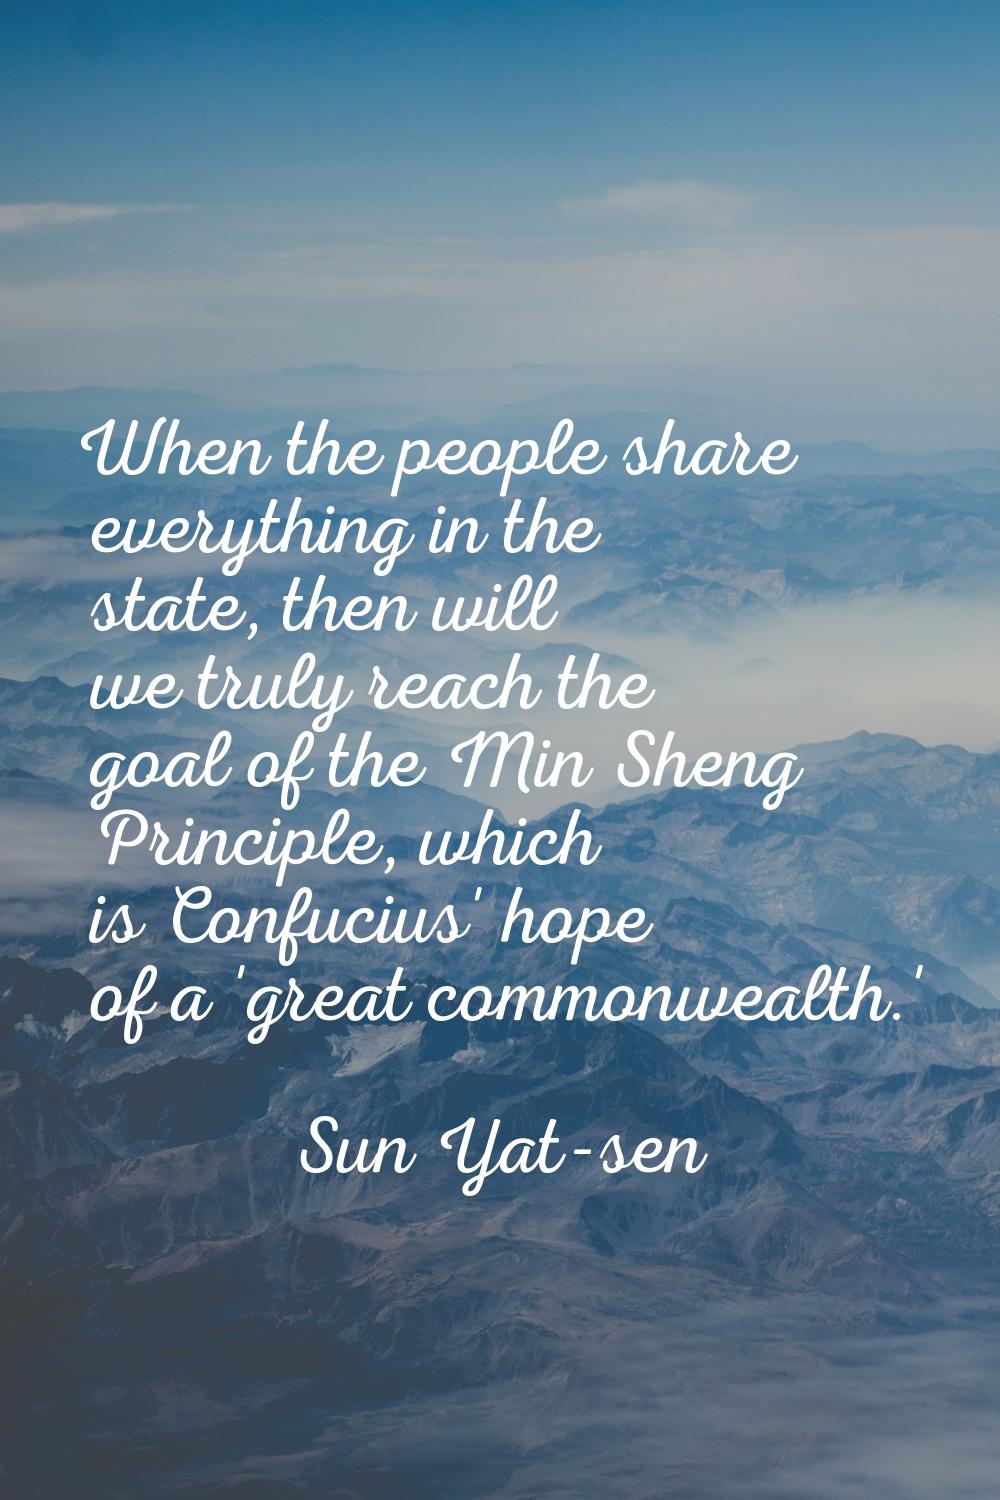 When the people share everything in the state, then will we truly reach the goal of the Min Sheng P